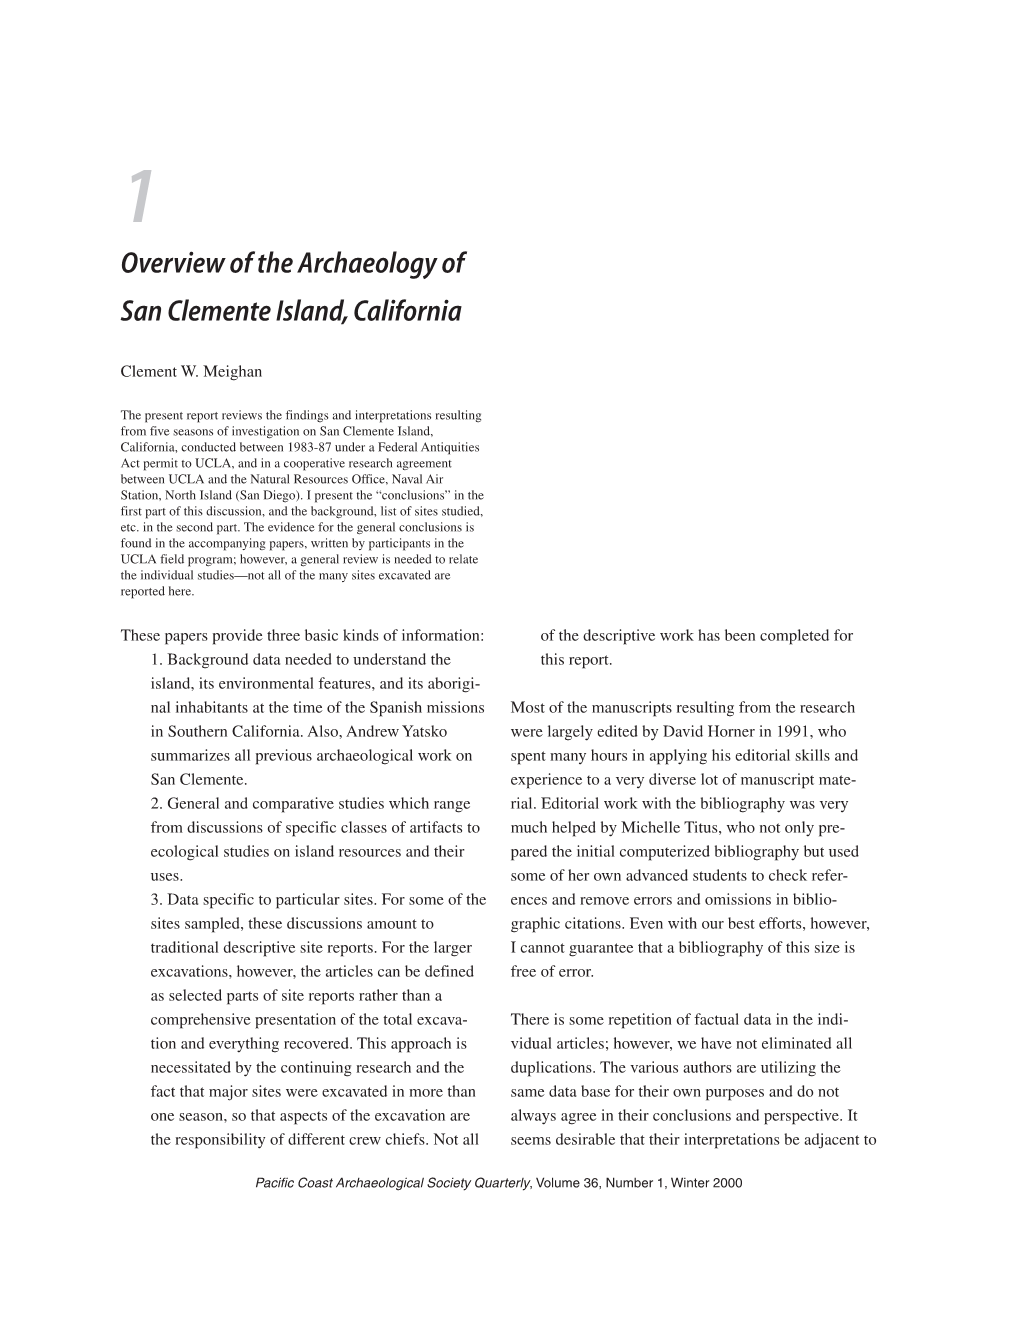 Overview of the Archaeology of San Clemente Island, California